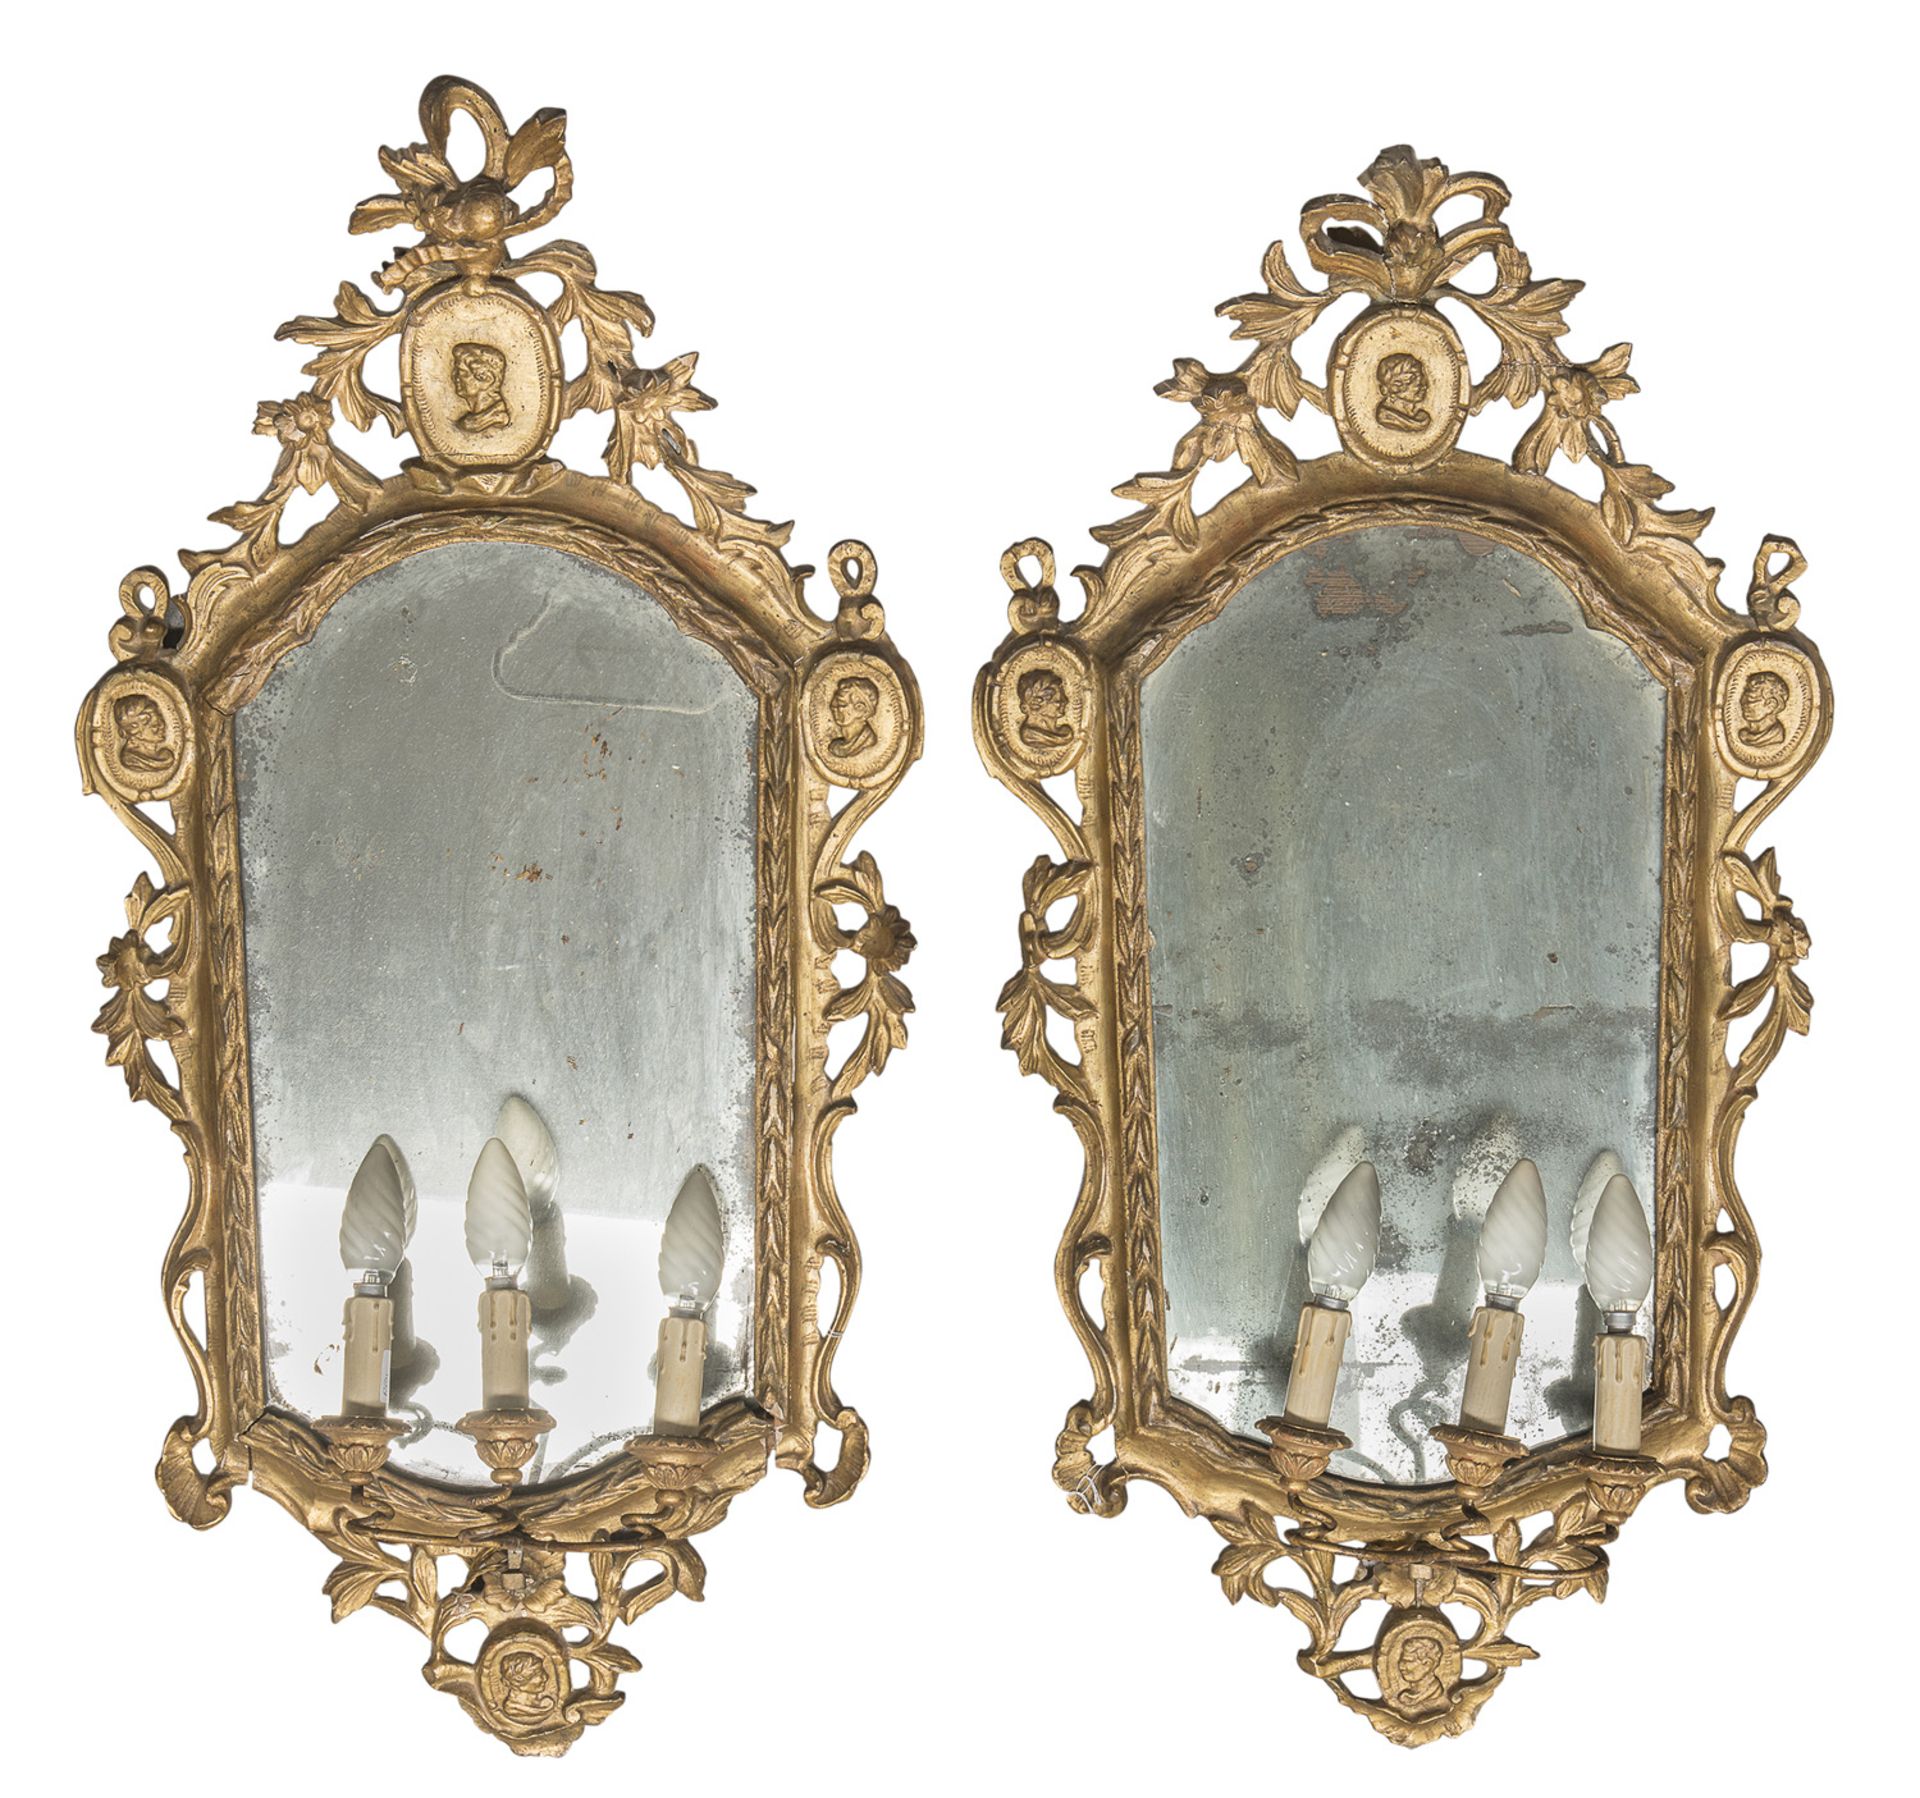 BEAUTIFUL PAIR OF GILTWOOD MIRRORS PROBABLY NAPLES 18TH CENTURY